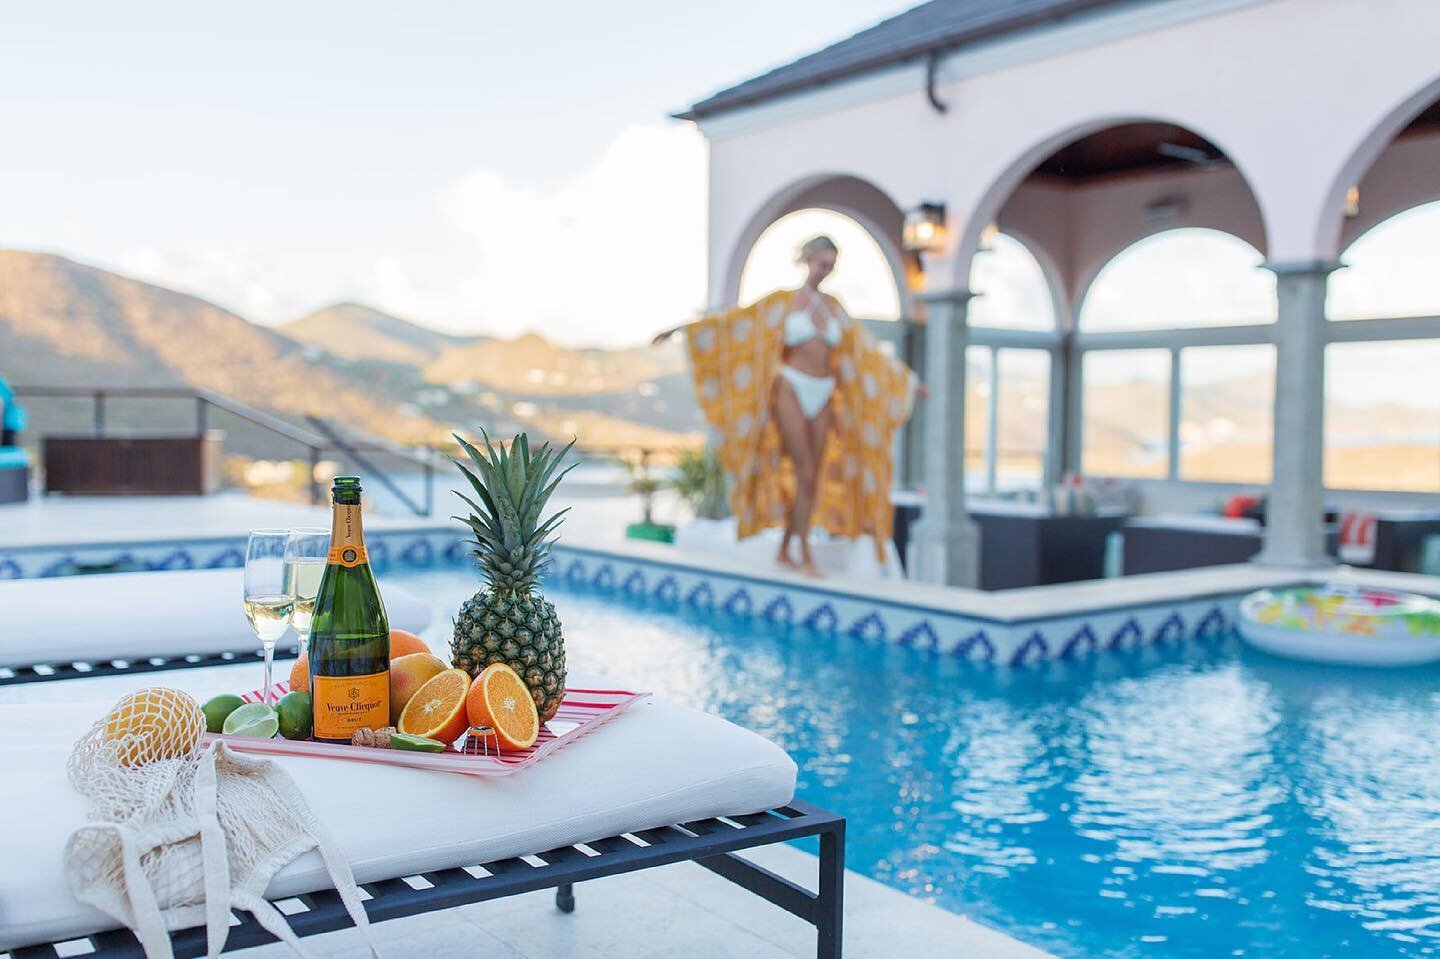 The Finisterre Estate, where all of your needs are met from the most helpful concierge, to stunning views, a comfortable and inviting atmosphere and more.

#finisterreestate #stjohnvirginislands #veuveclicquot #luxuryvillas